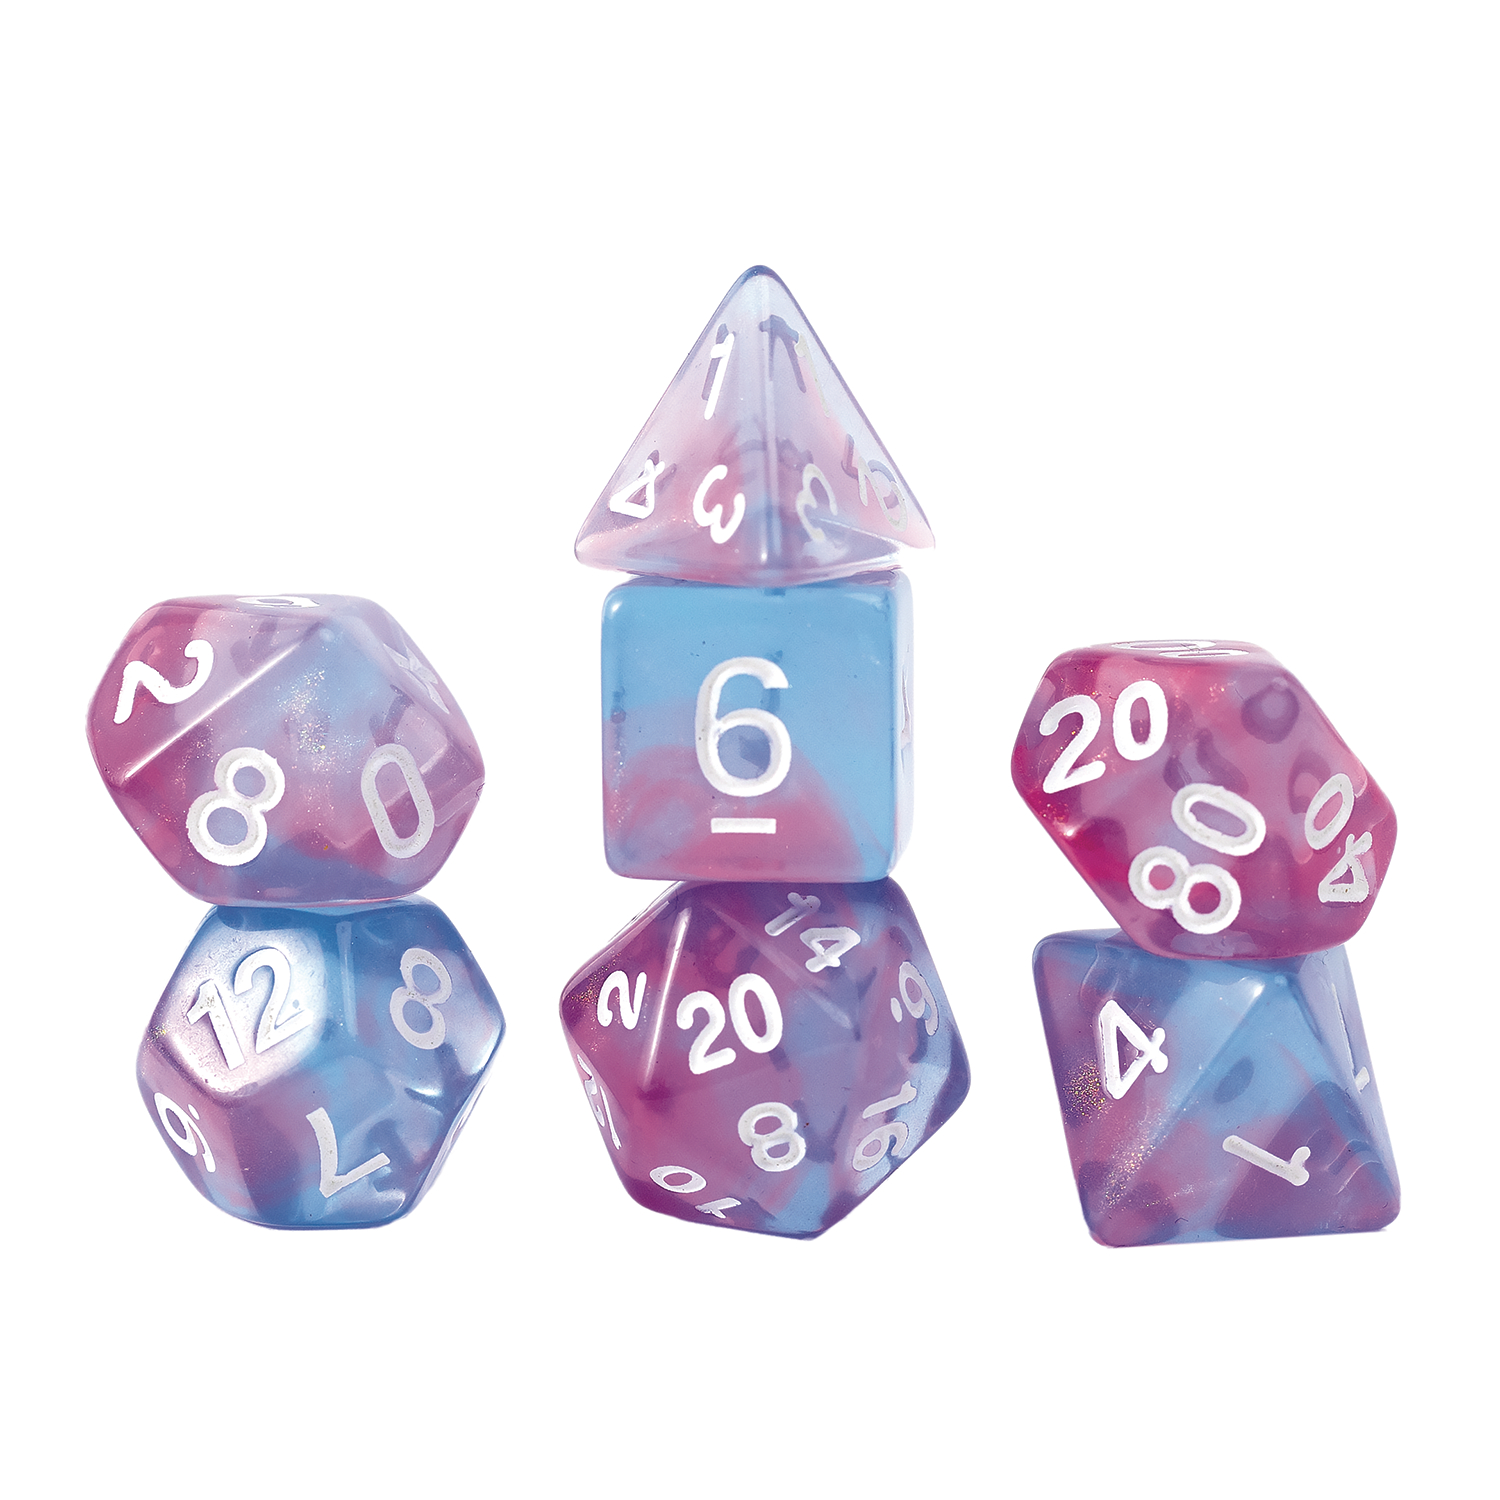 Sirius Dice: Unearthed Treasure Series - Opal (7)